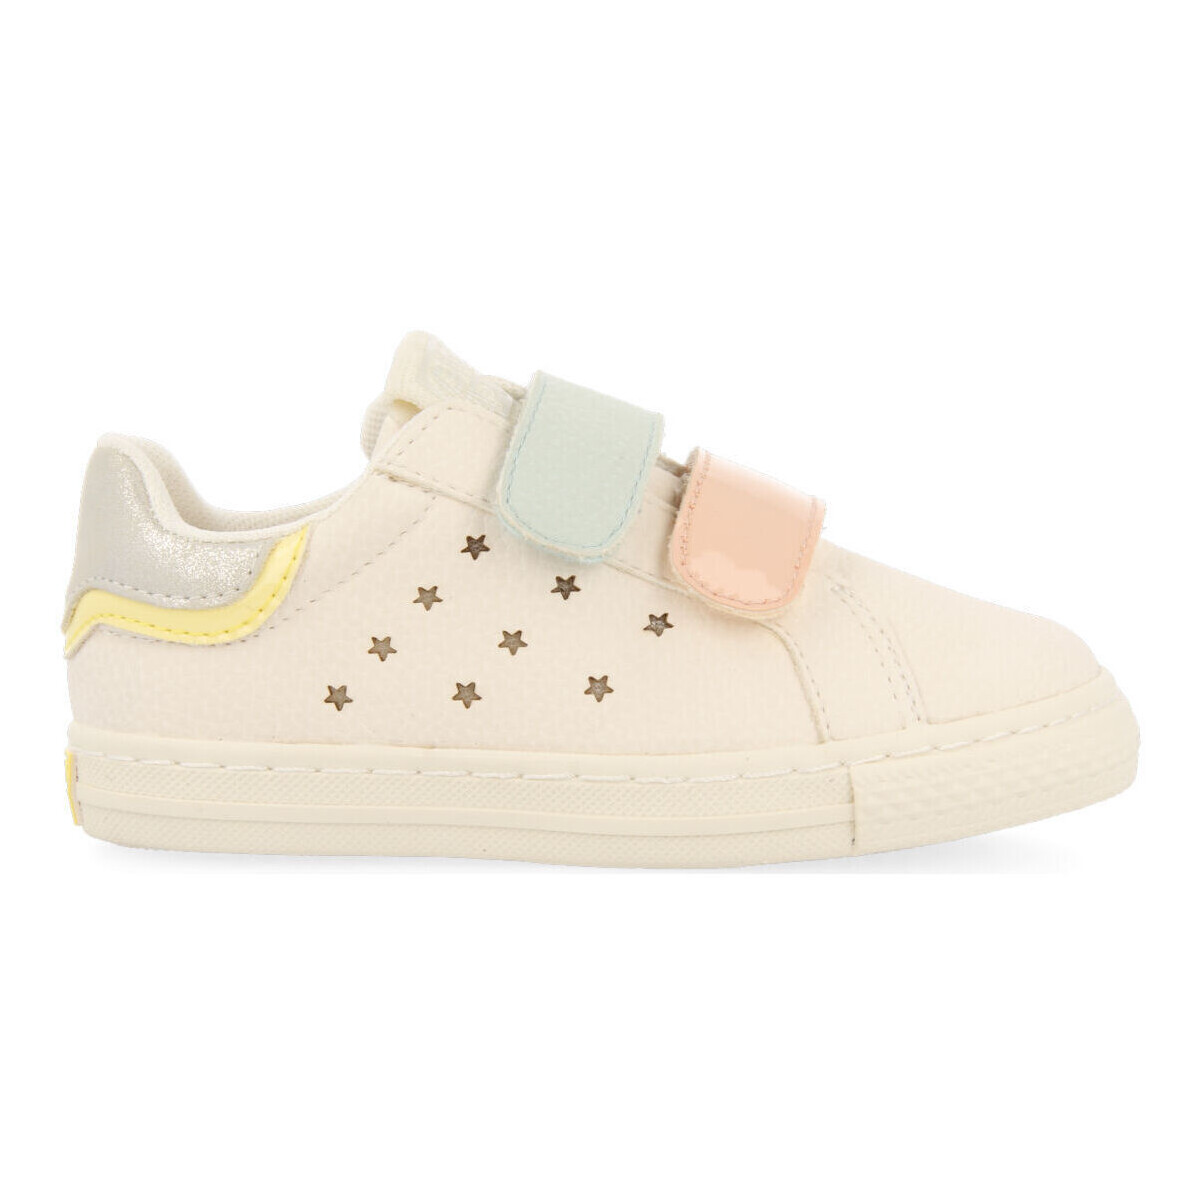 Chaussures Baskets mode Gioseppo GARDERE Blanc